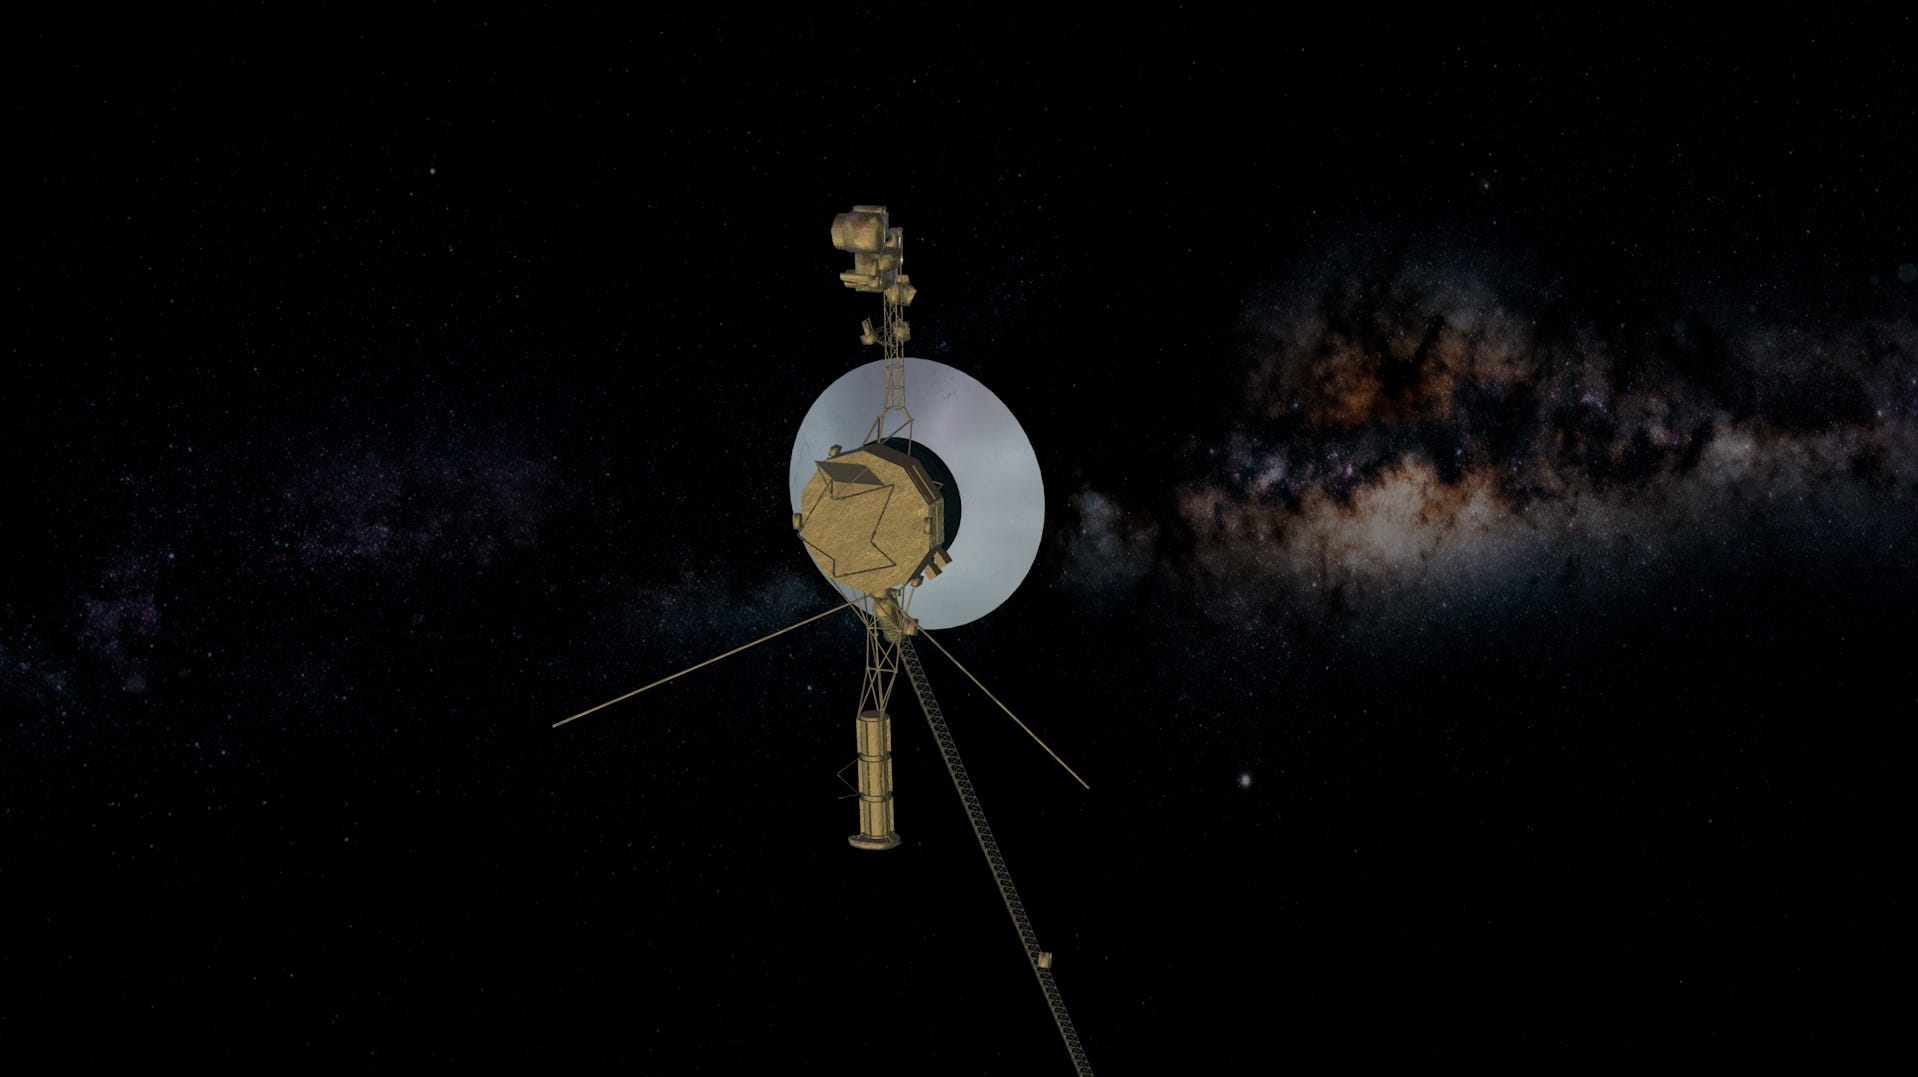 Recount Voyager 1's interstellar odyssey that outlived NASA expectations